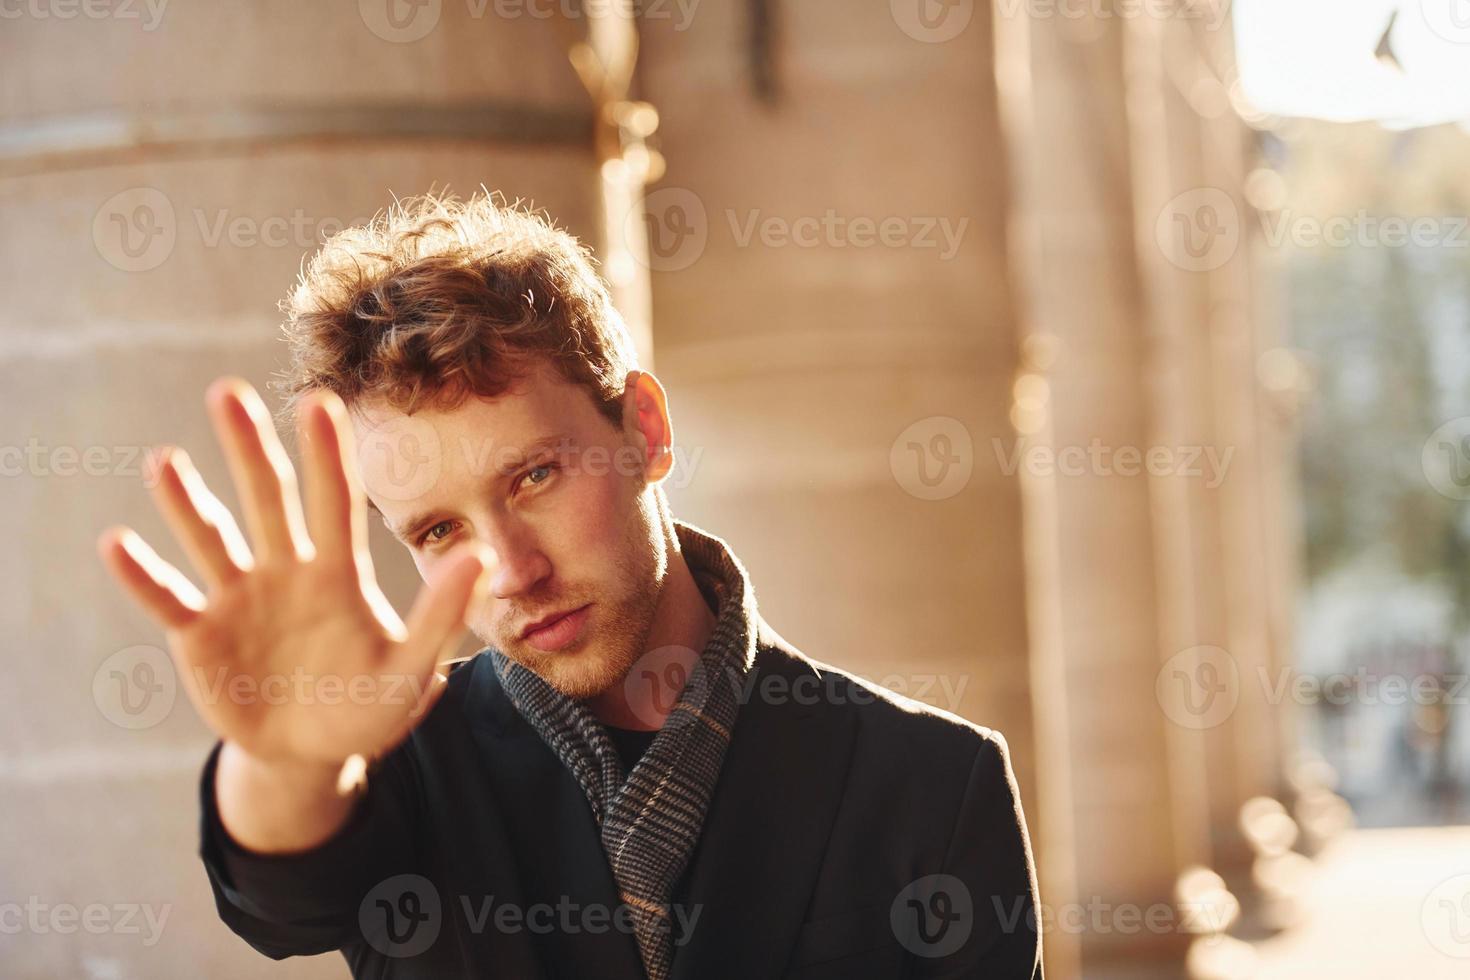 Shows stop gesture by the hand. Elegant young man in formal classy clothes outdoors in the city photo